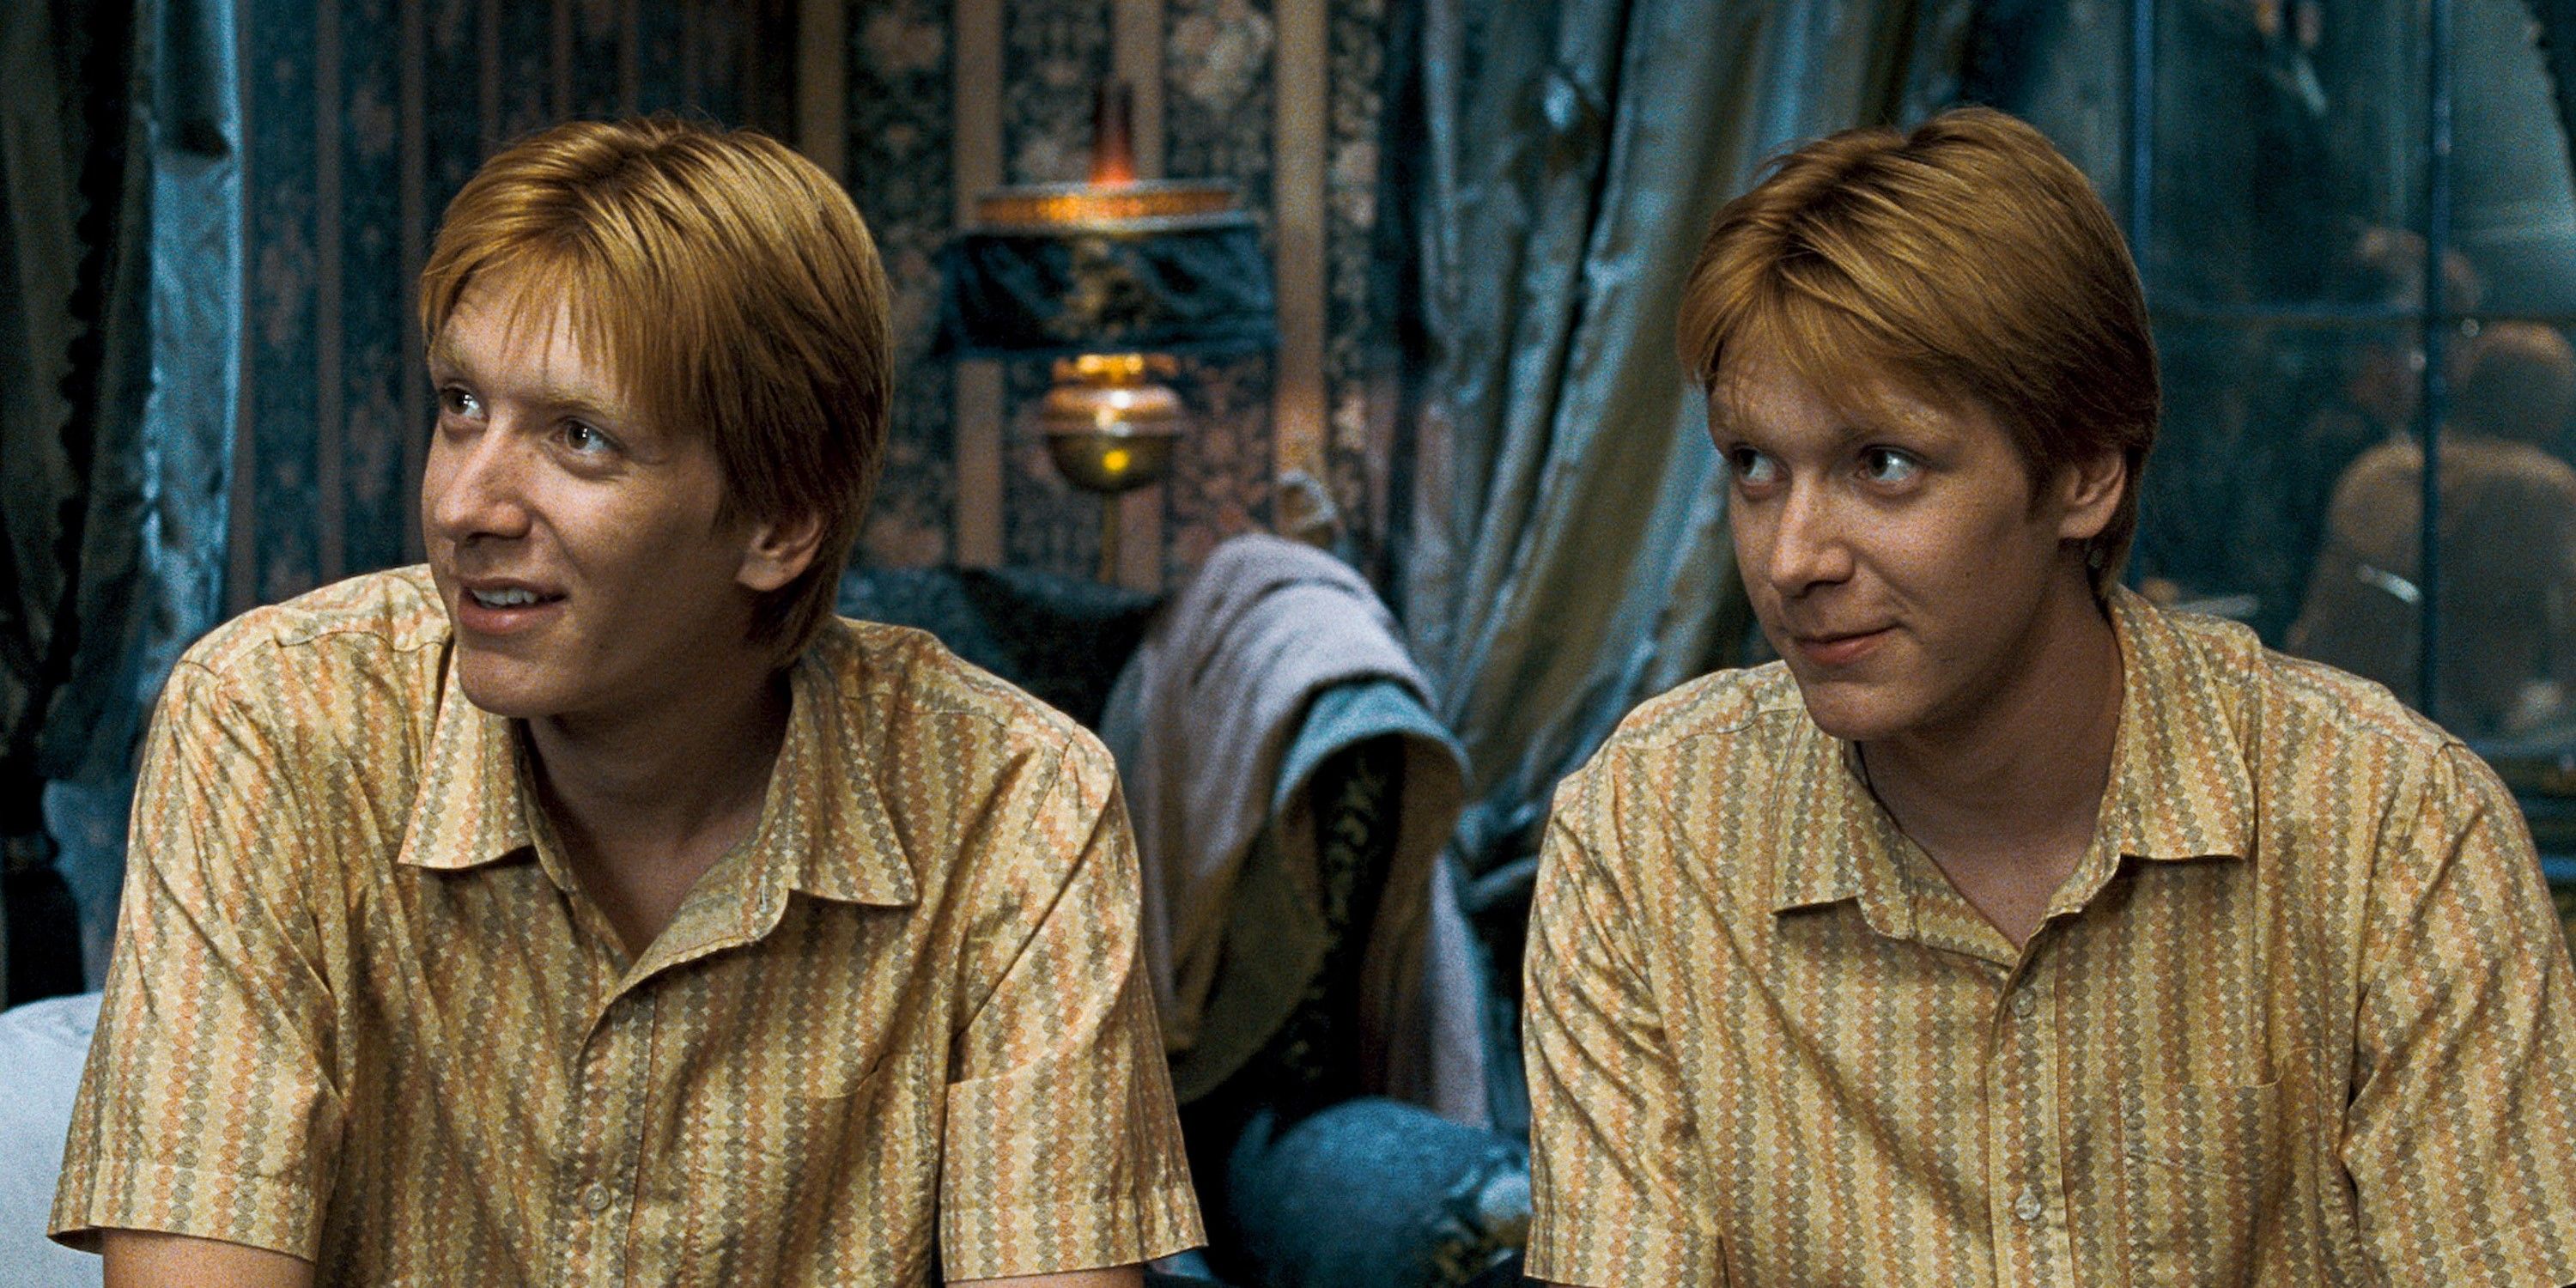 Harry Potter's Fred and George Weasley cracking a joke.